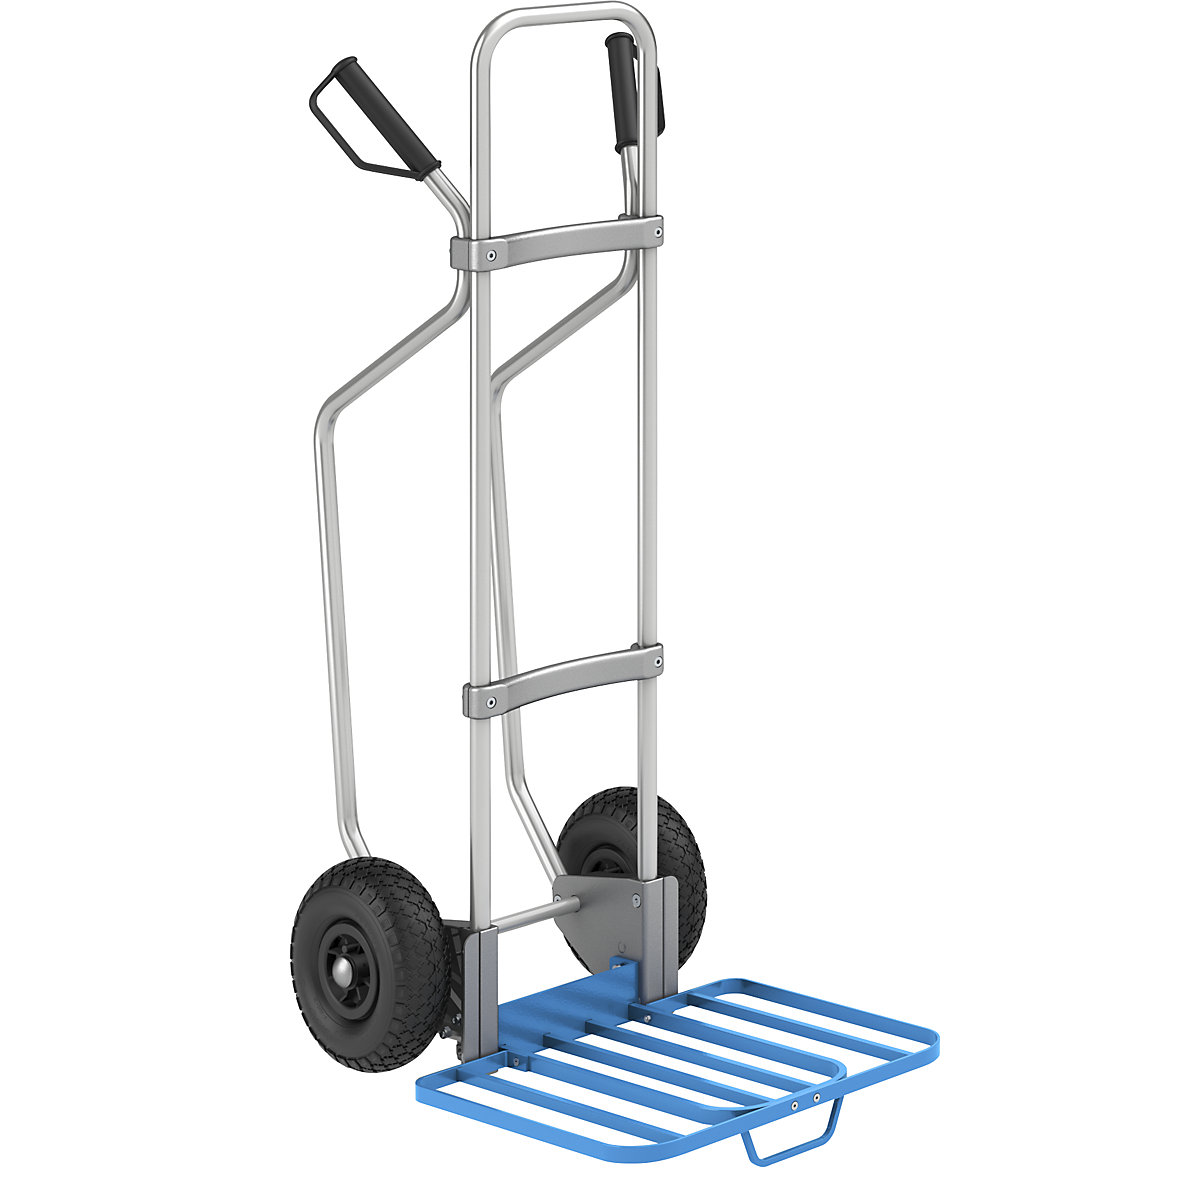 Aluminium sack truck with runners – eurokraft pro, parcel footplate WxD 430 x 450 mm, blue, with handle, pneumatic tyres, 2+ items-1